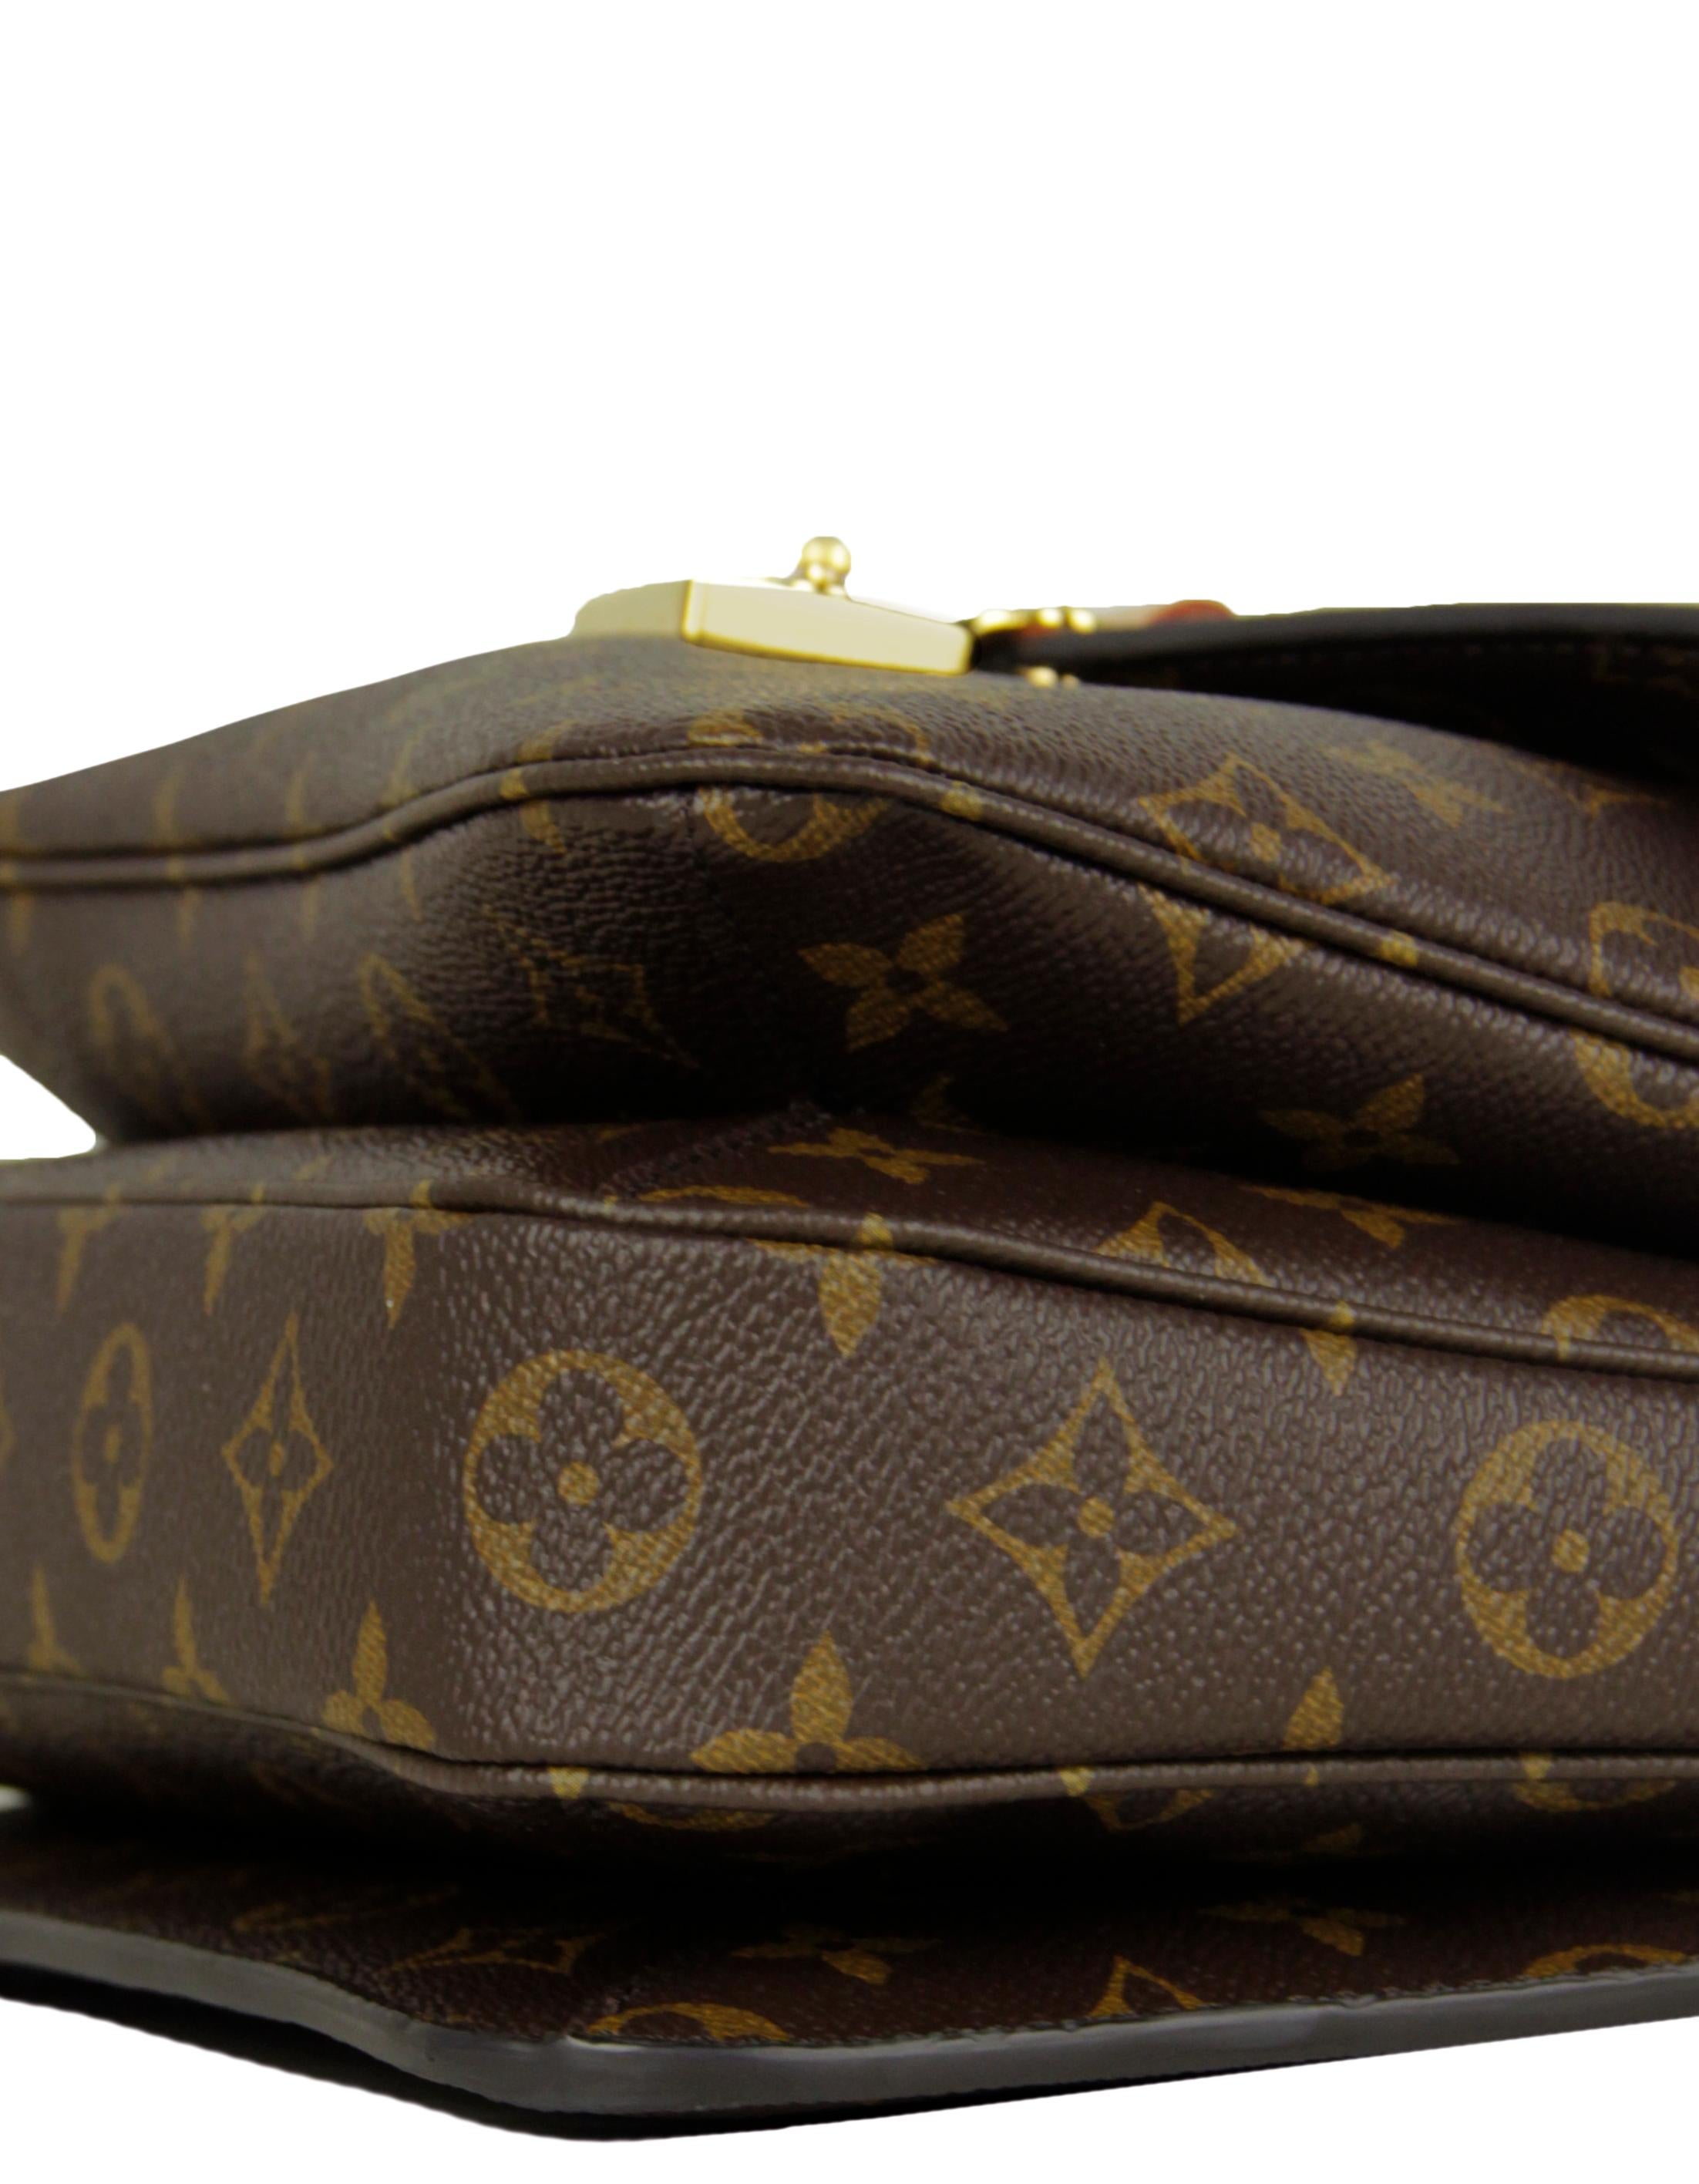 Louis Vuitton Monogram Pochette Metis Messenger Bag In Excellent Condition In New York, NY